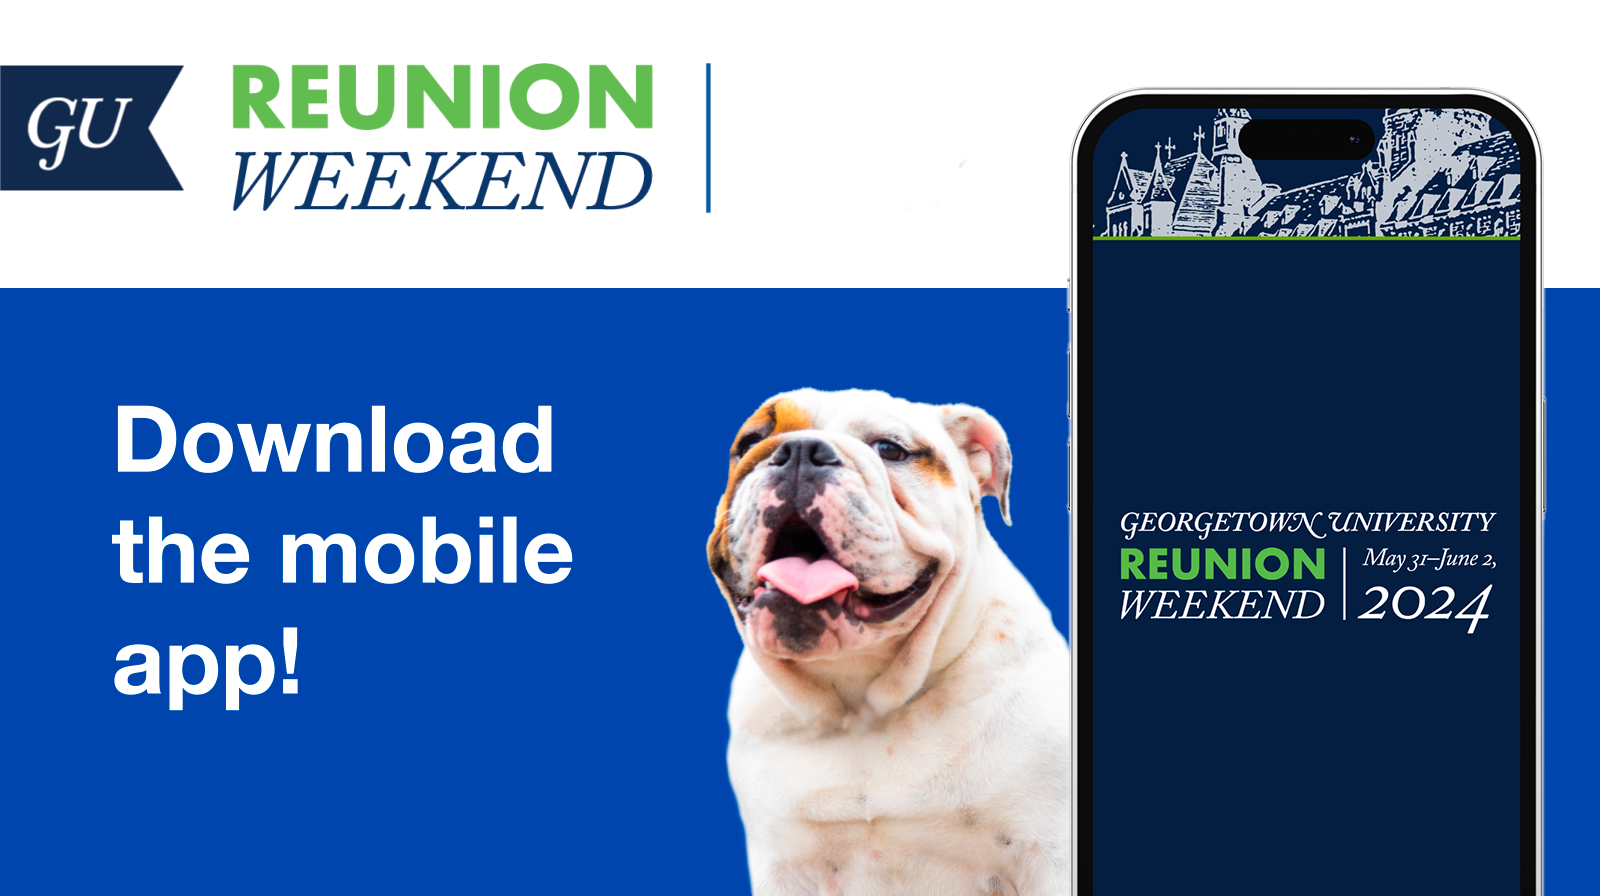 download the mobile app for reunion weekend!